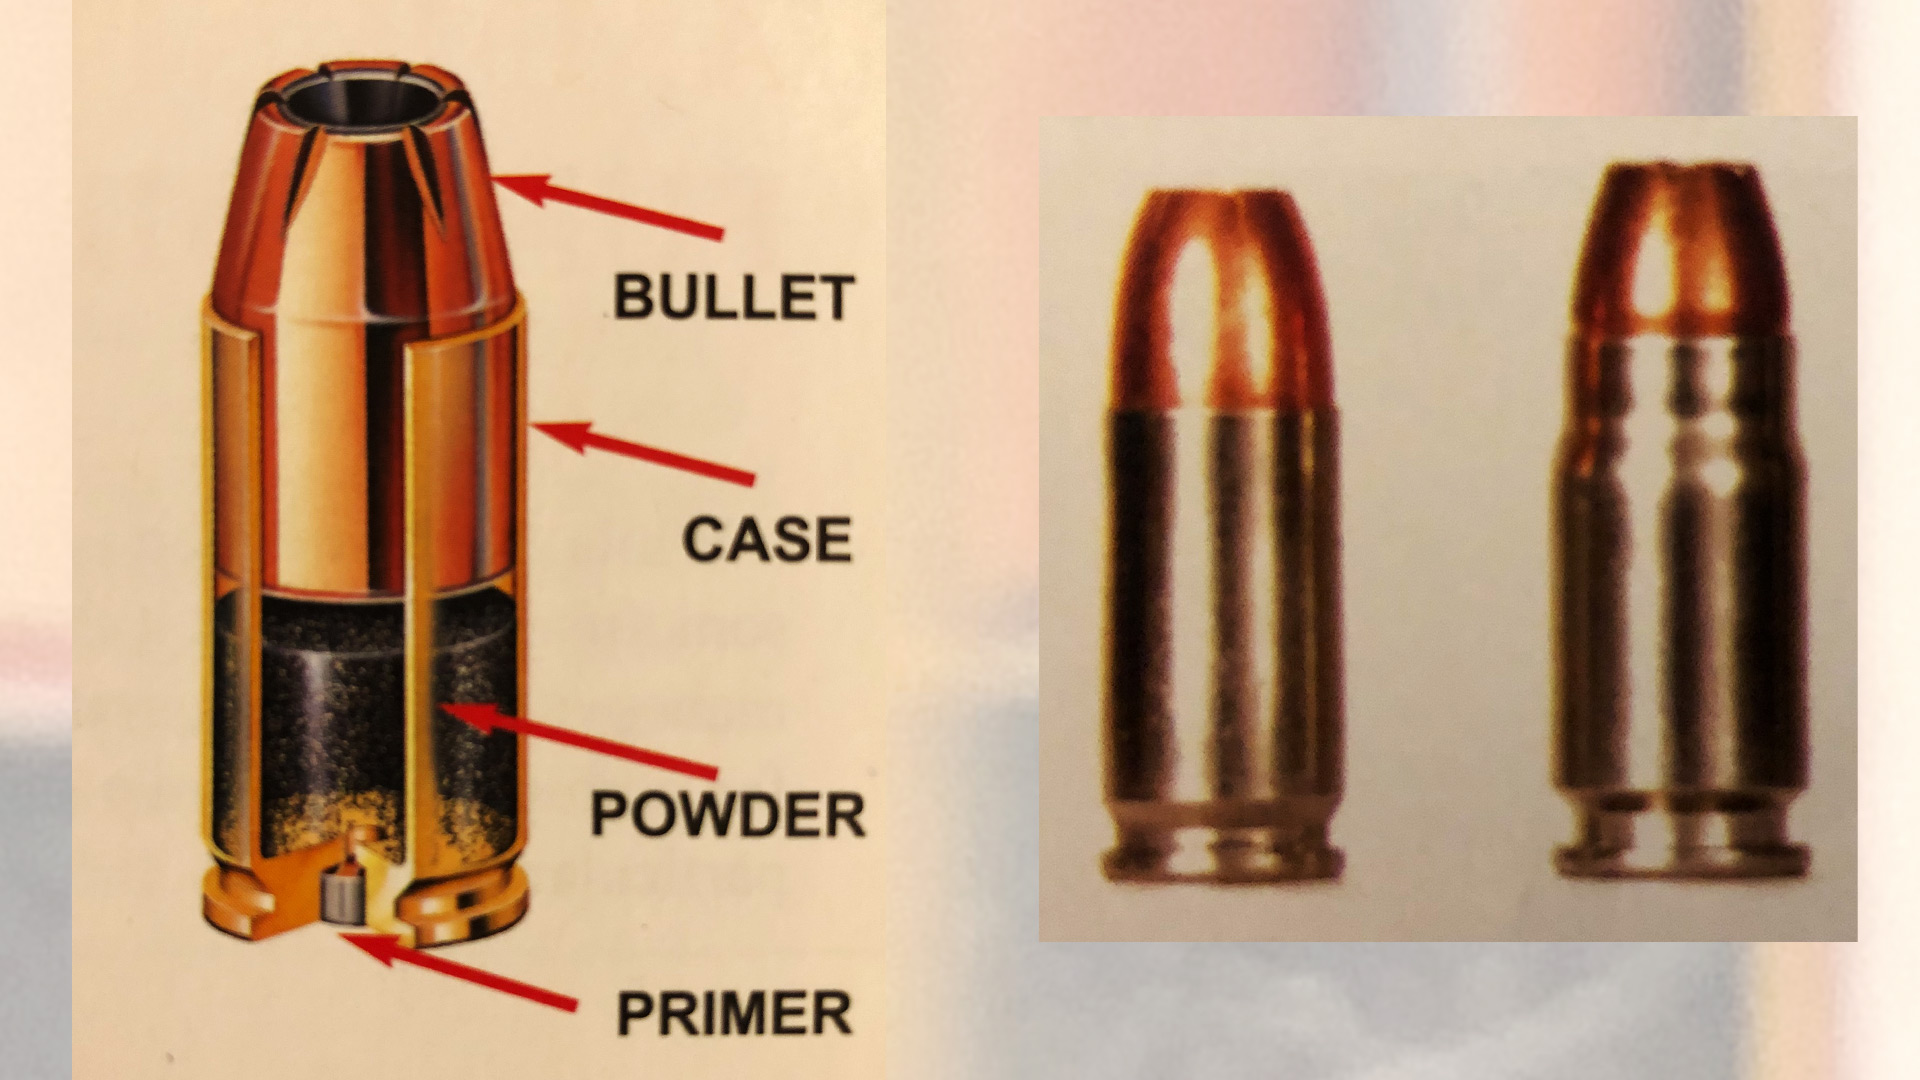 Cartridge Cases - The Basics of Firearms and Ammunition